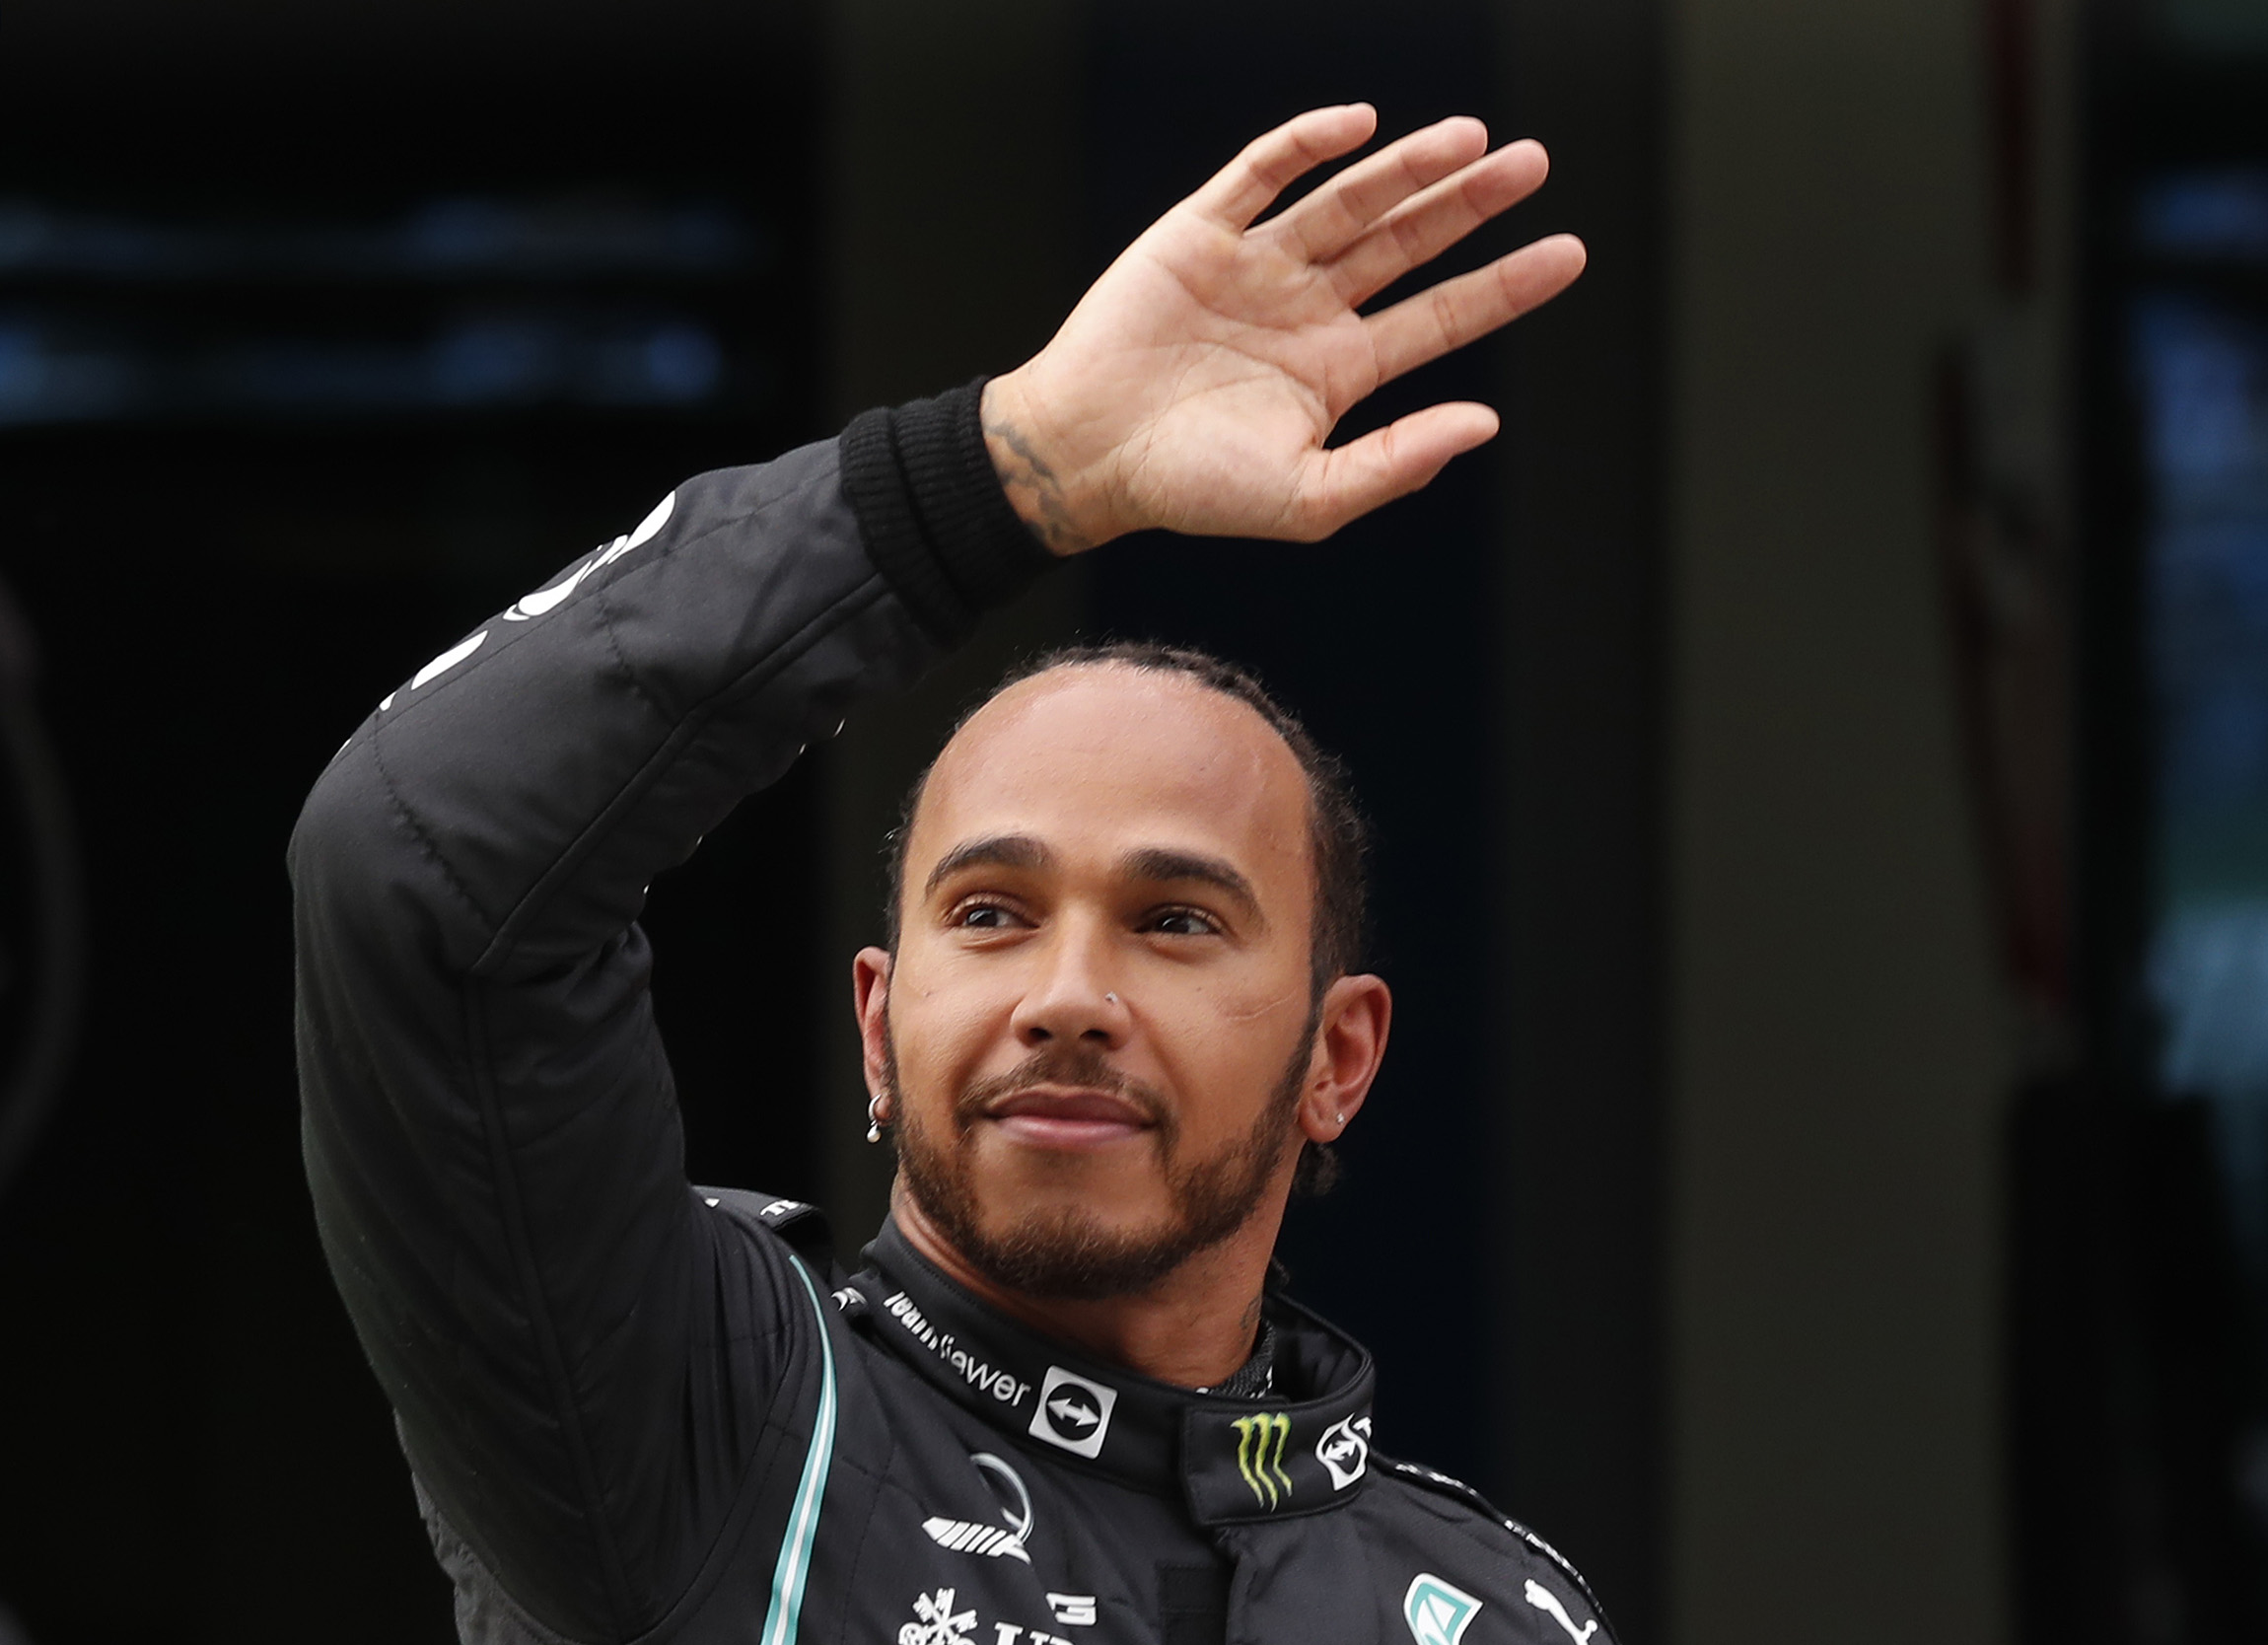 Lewis Hamilton Disapproves of Spectators Cheering when he Crashed